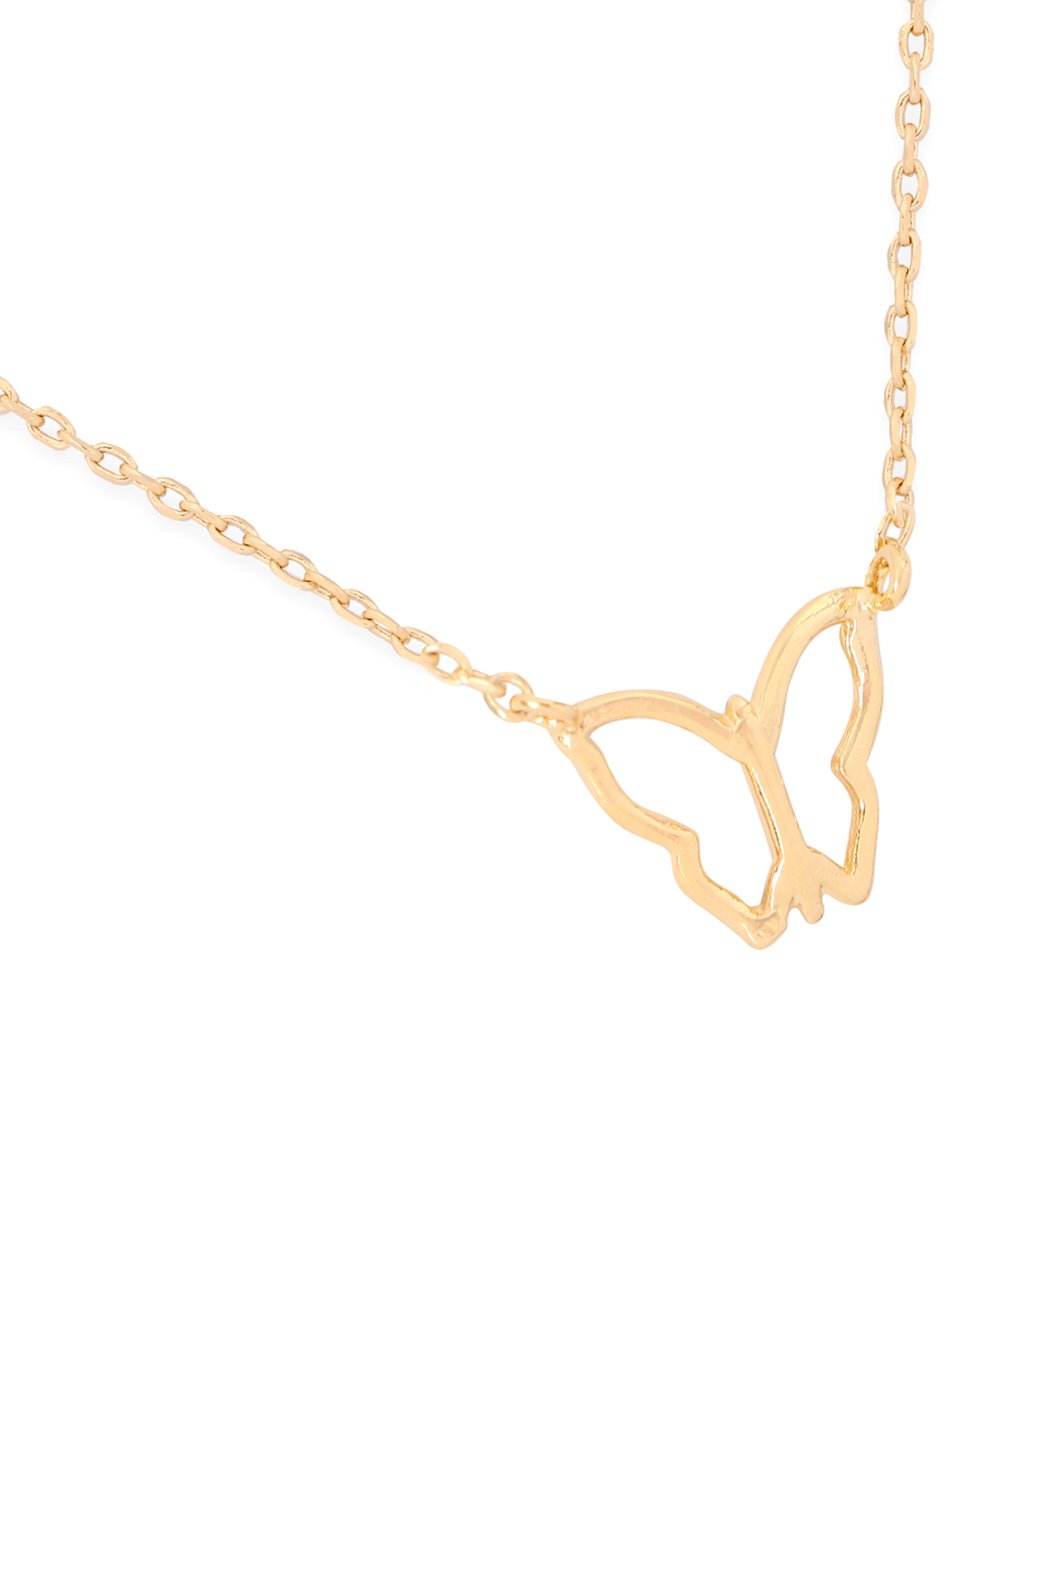 Hdnen357 - Open Butterfly Pendant Necklace - LOLA LUXE